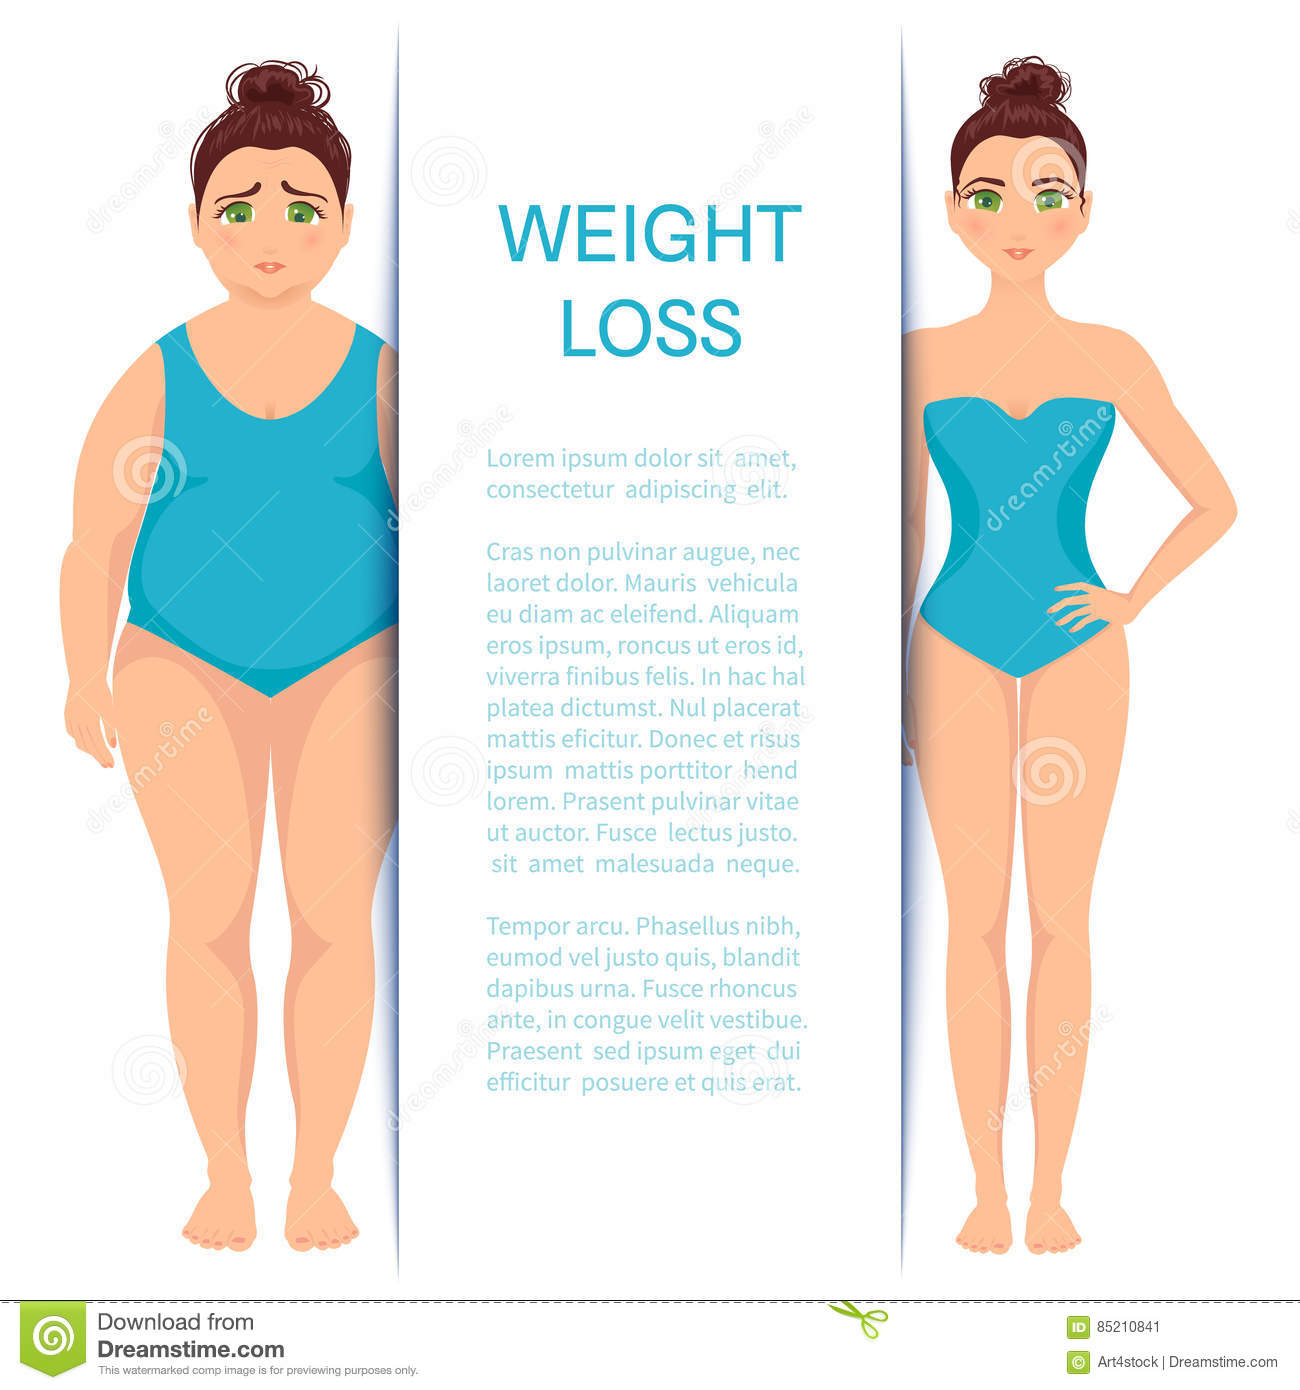 Weight Loss Poster With Women Stock Vector - Illustration of  In Weight Loss Flyer Template With Regard To Weight Loss Flyer Template